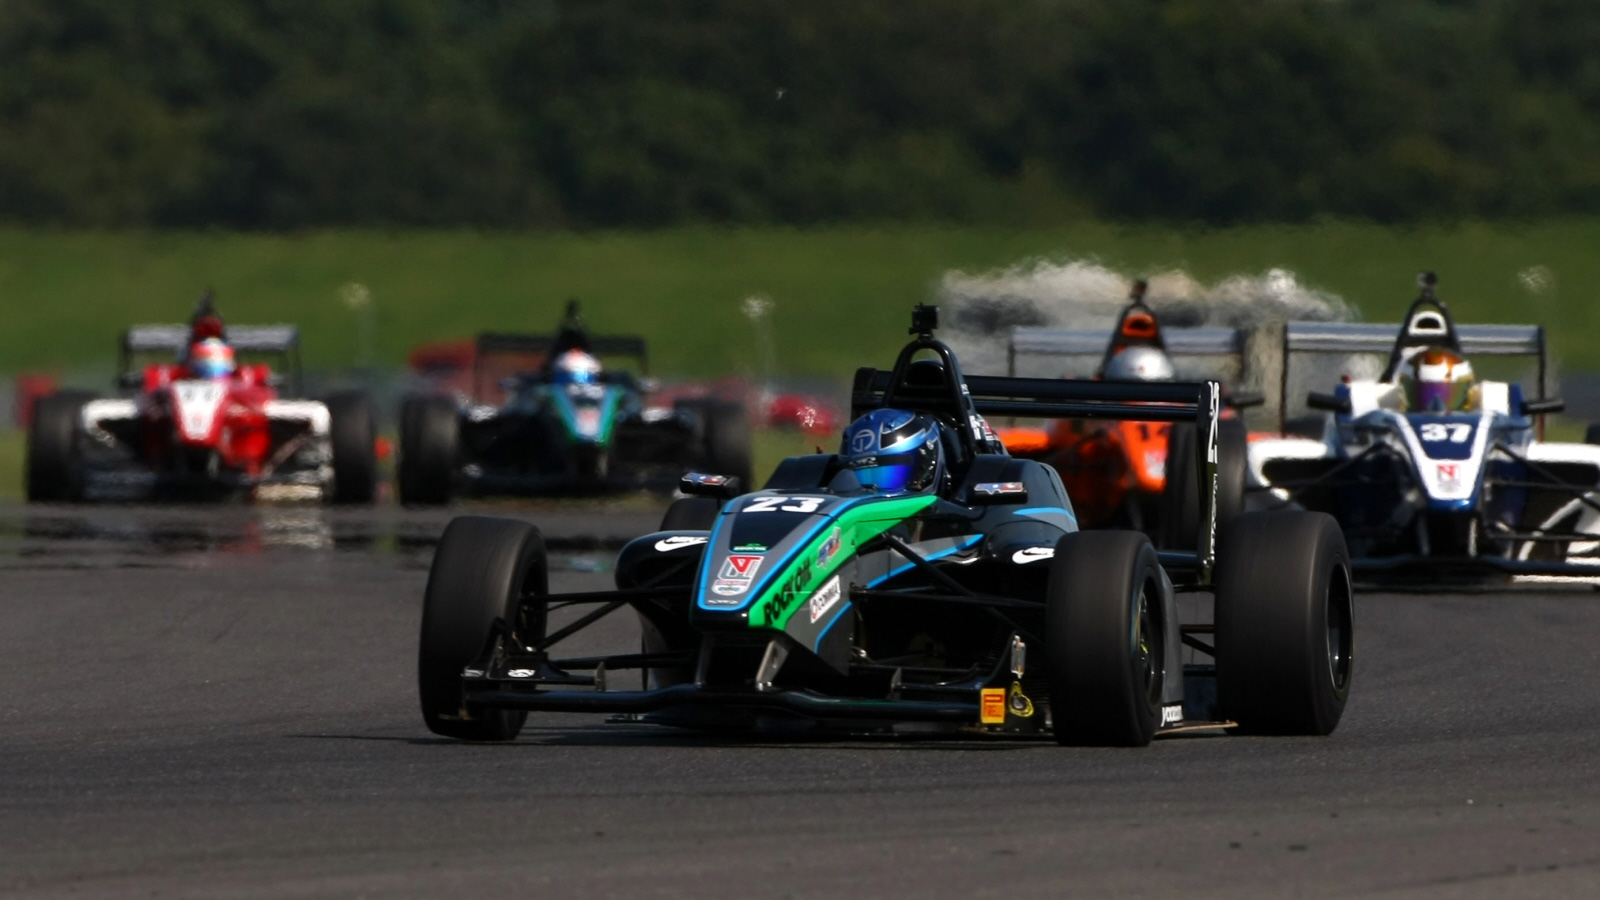 Donington Park Grand Prix Circuit in Leicestershire will host rounds 19, 20 and 21 of the BRDC F4 season.